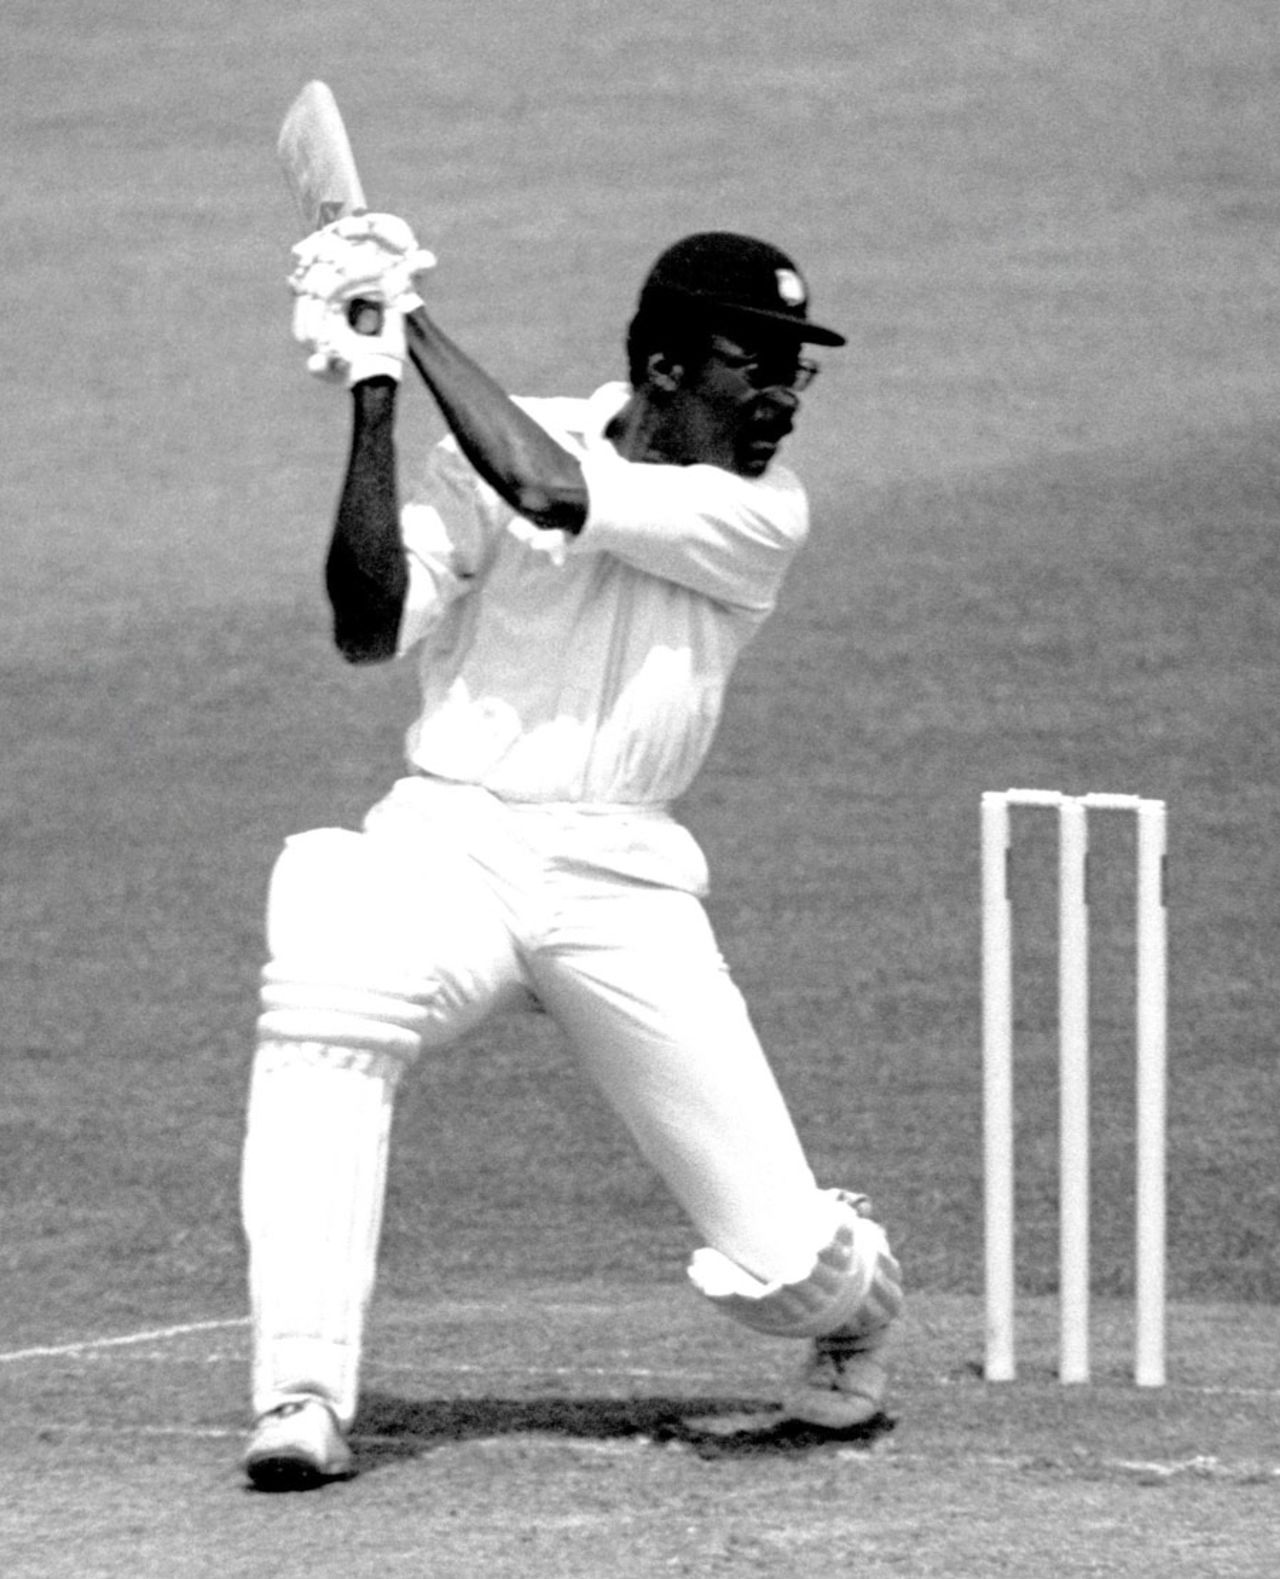 Clive Lloyd carves the ball through the off side, Australia v West Indies, World Cup final, Lord's, June 21, 1975